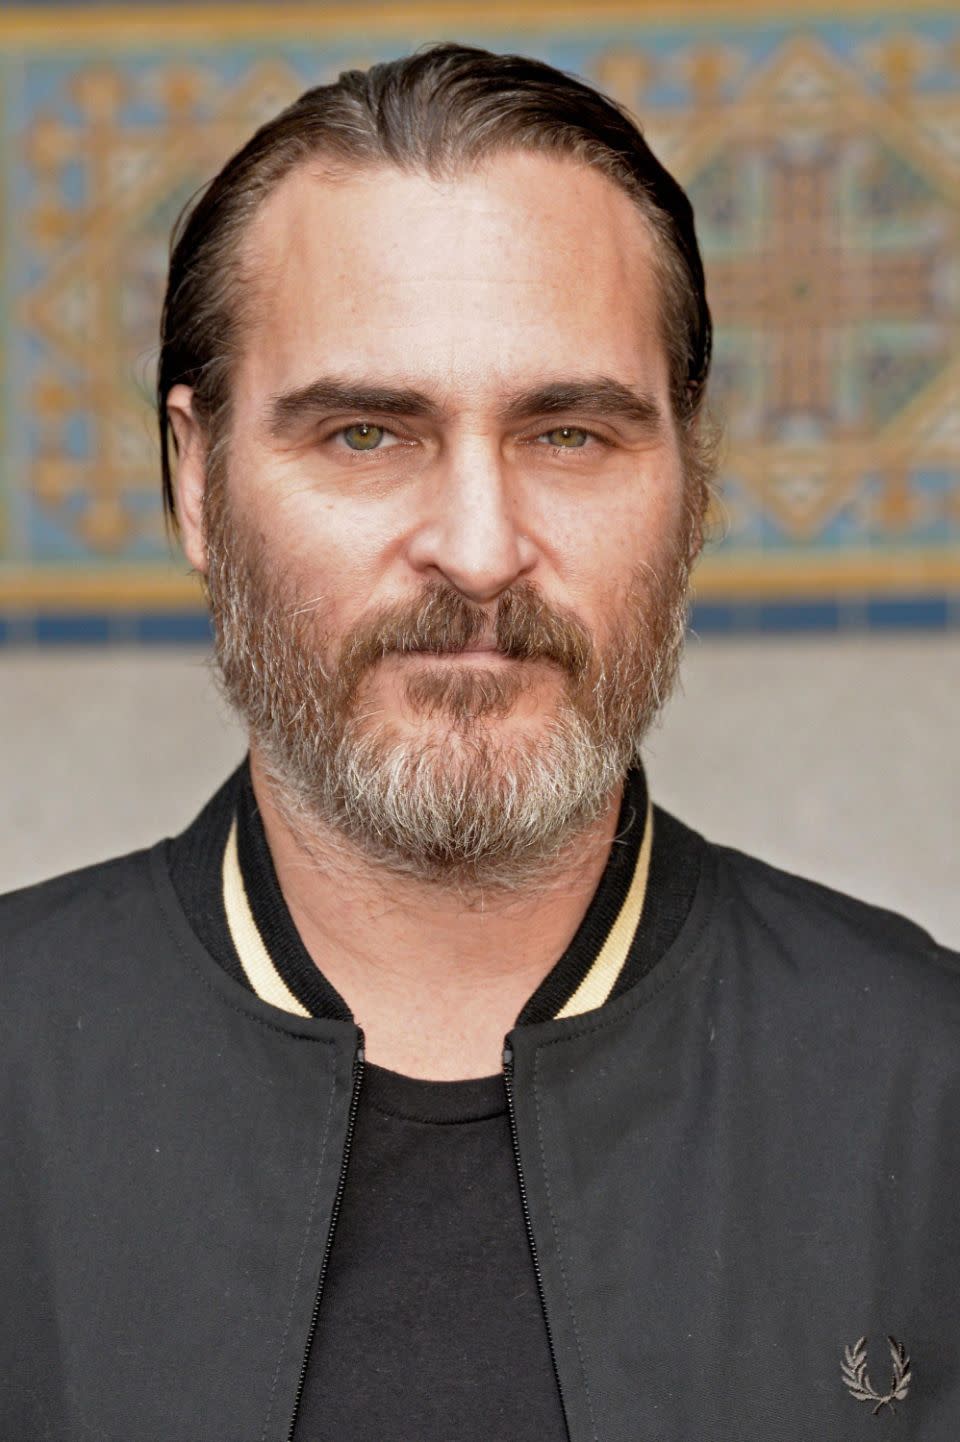 Actor Joaquin Phoenix was also raised in the cult. Source: Getty